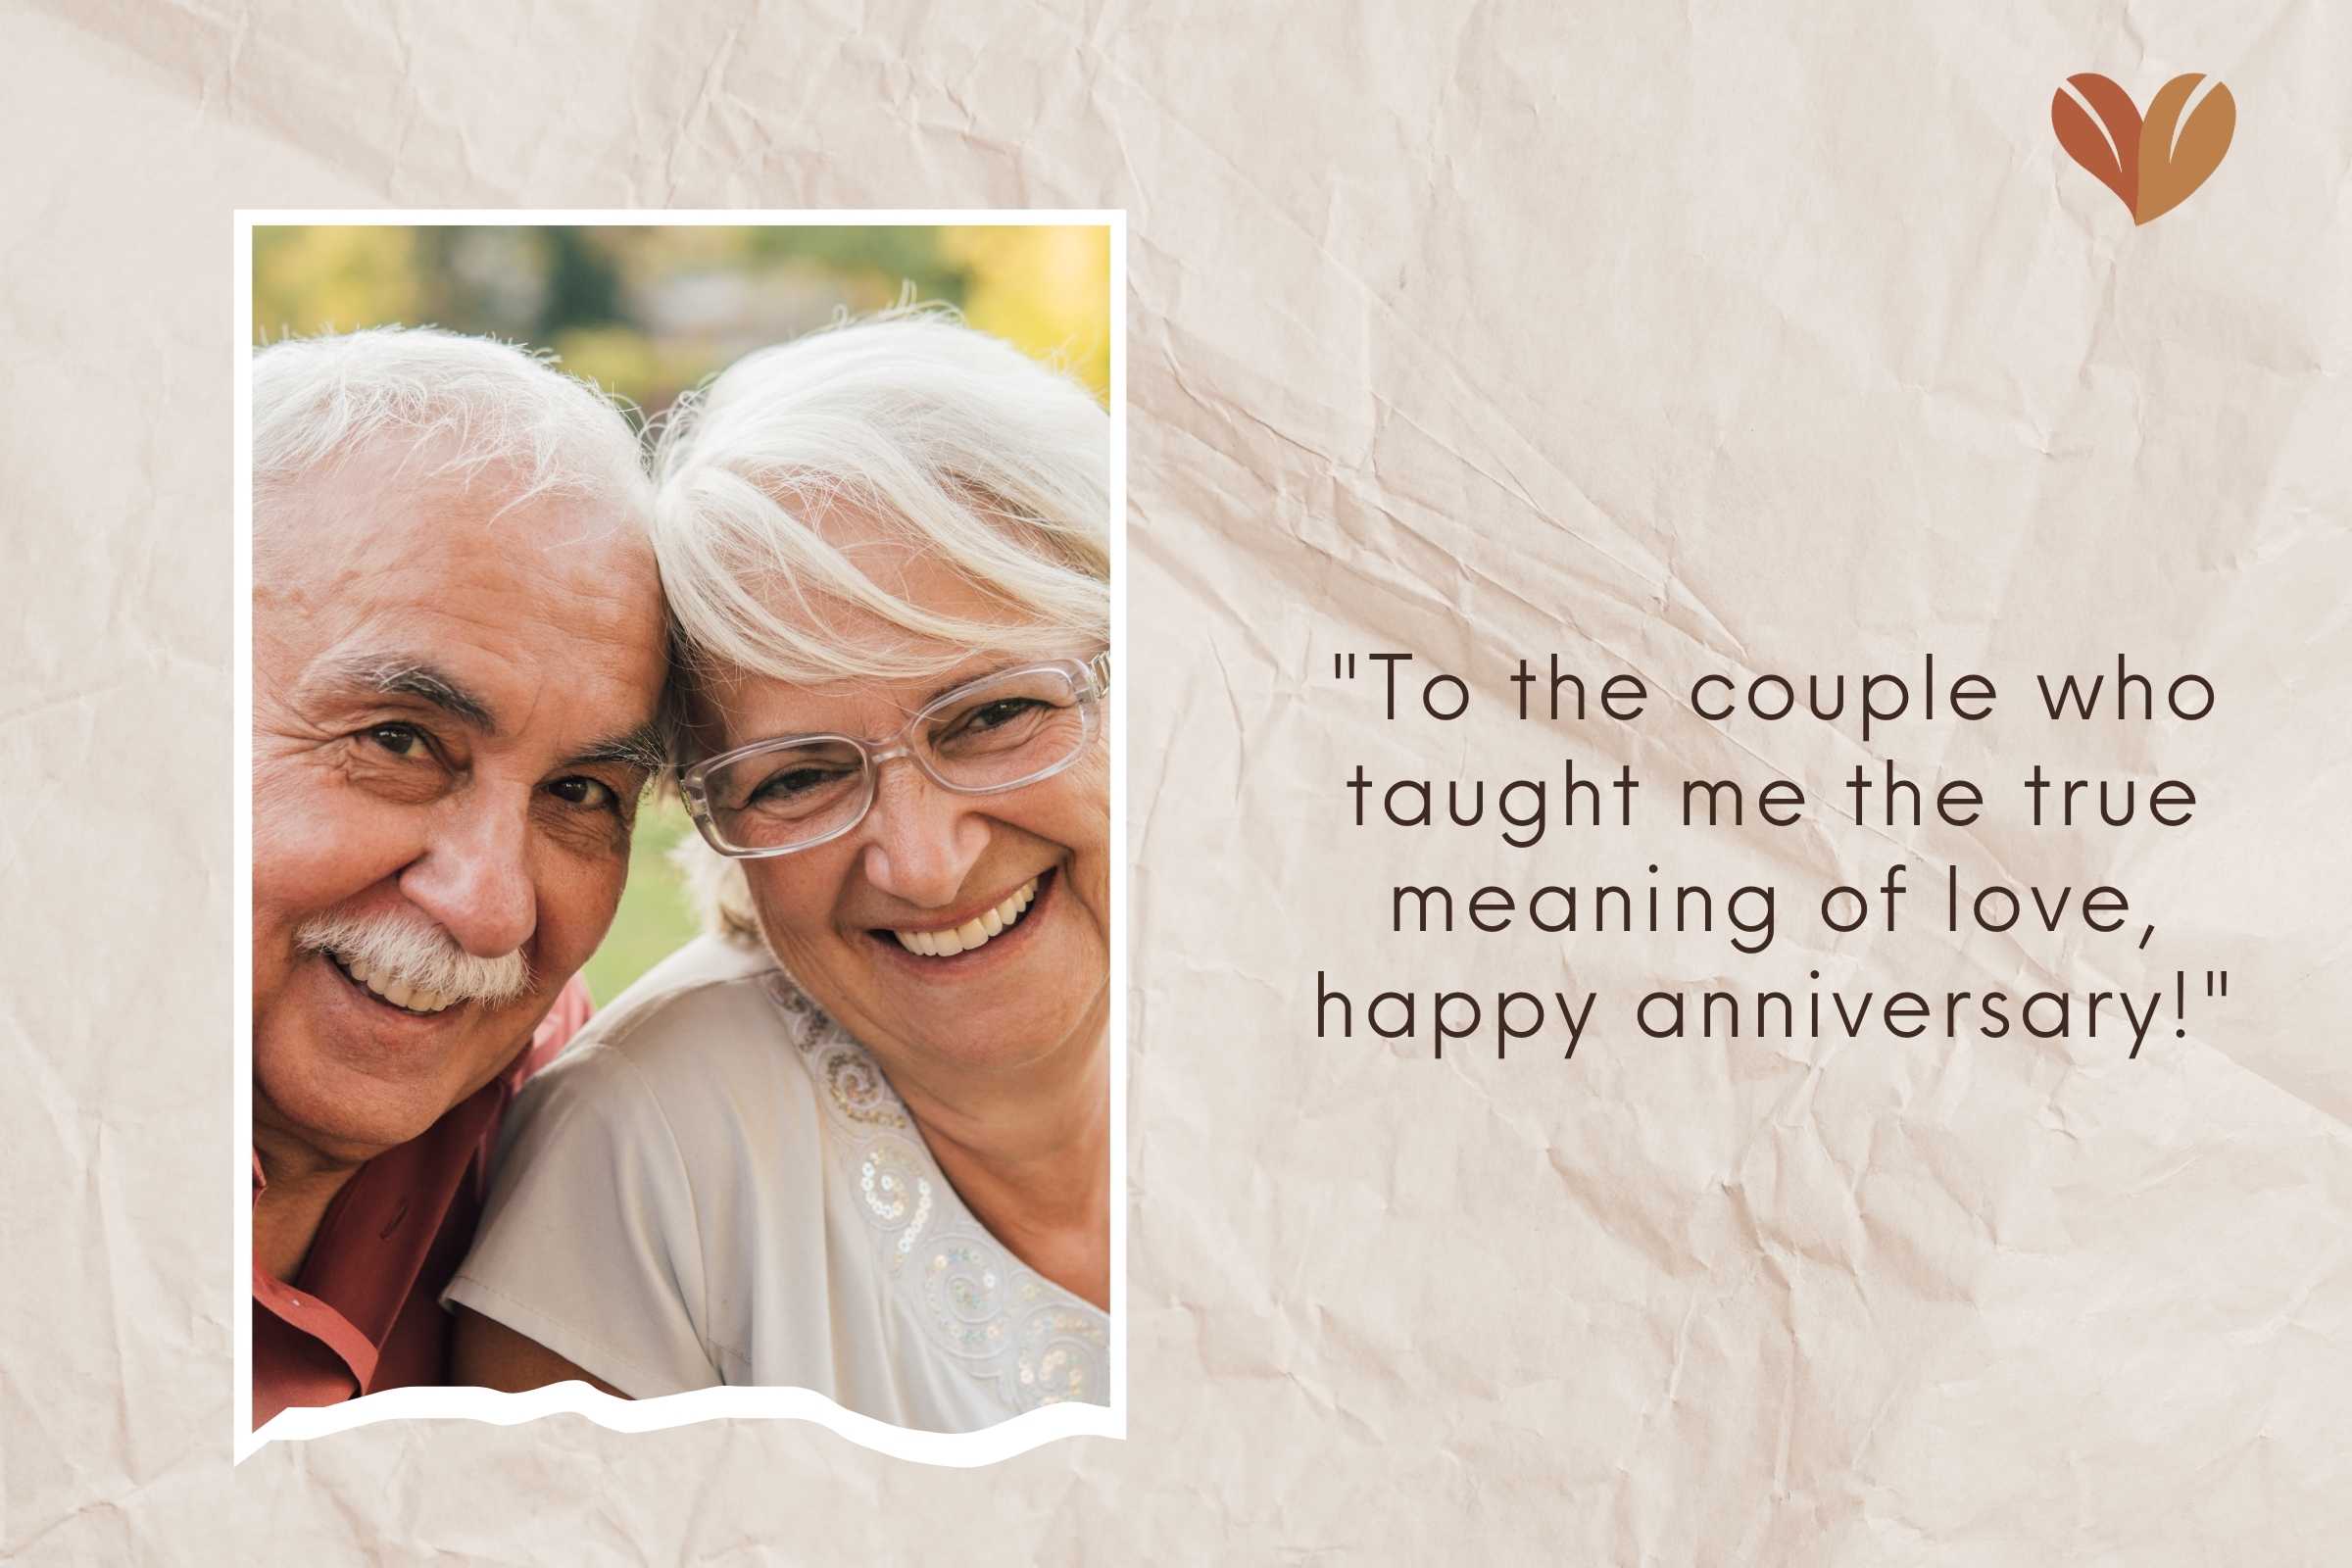 A heartwarming photo to complement lovely anniversary quotes for parents.